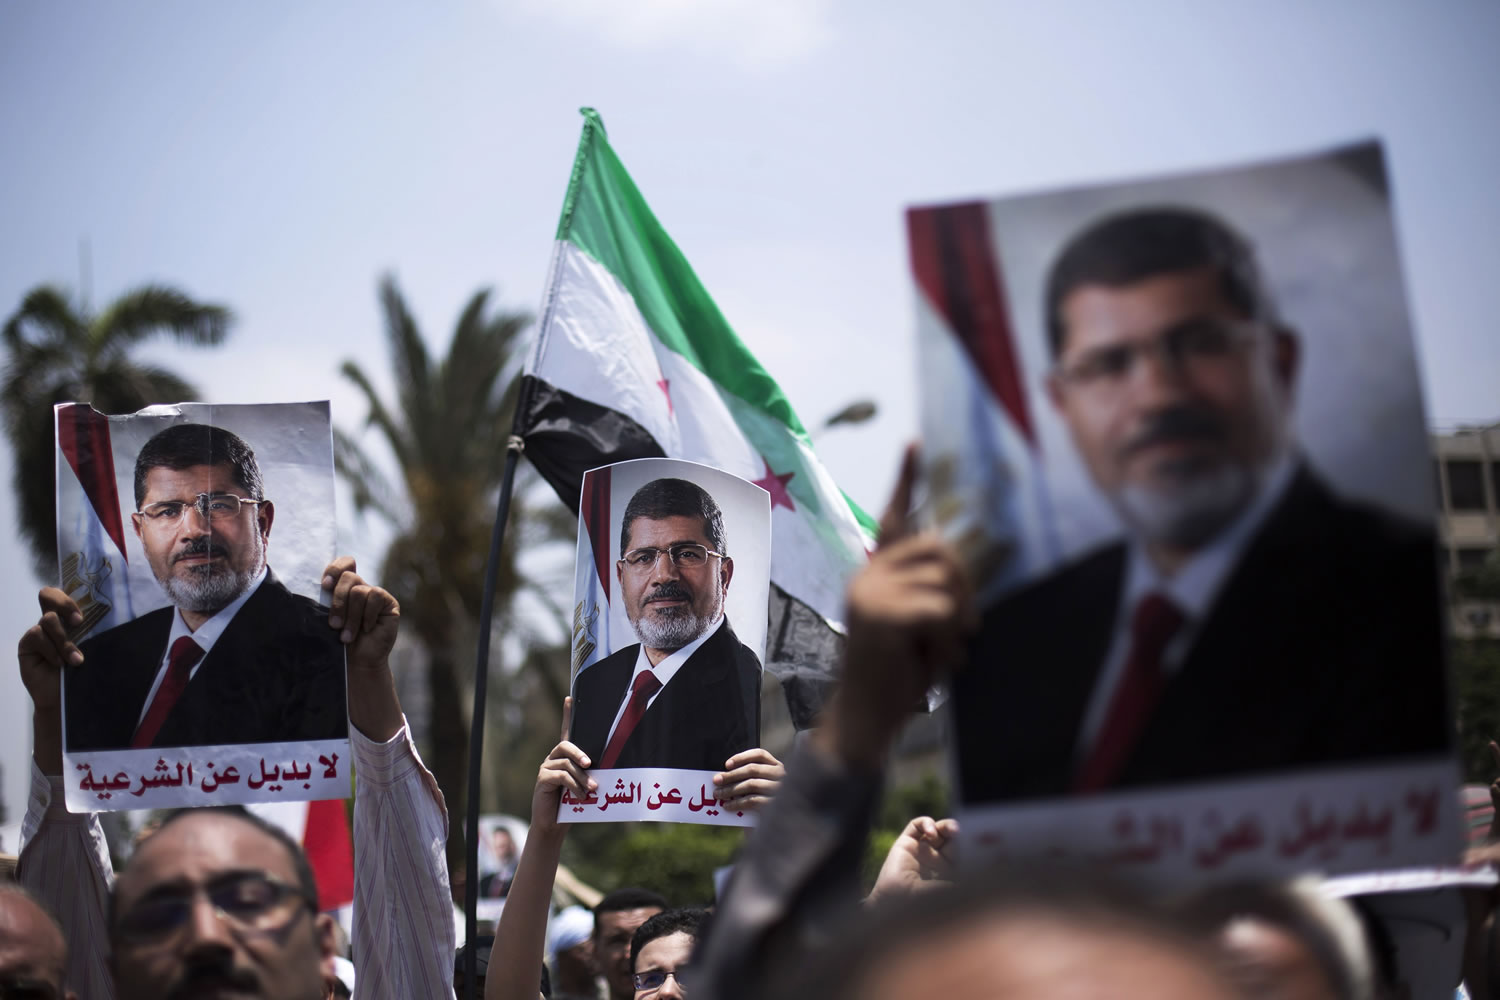 Supporters hold posters of Egypt's Islamist President Mohammed Morsi during a rally near Cairo University Square in Giza, Egypt, on Tuesday.